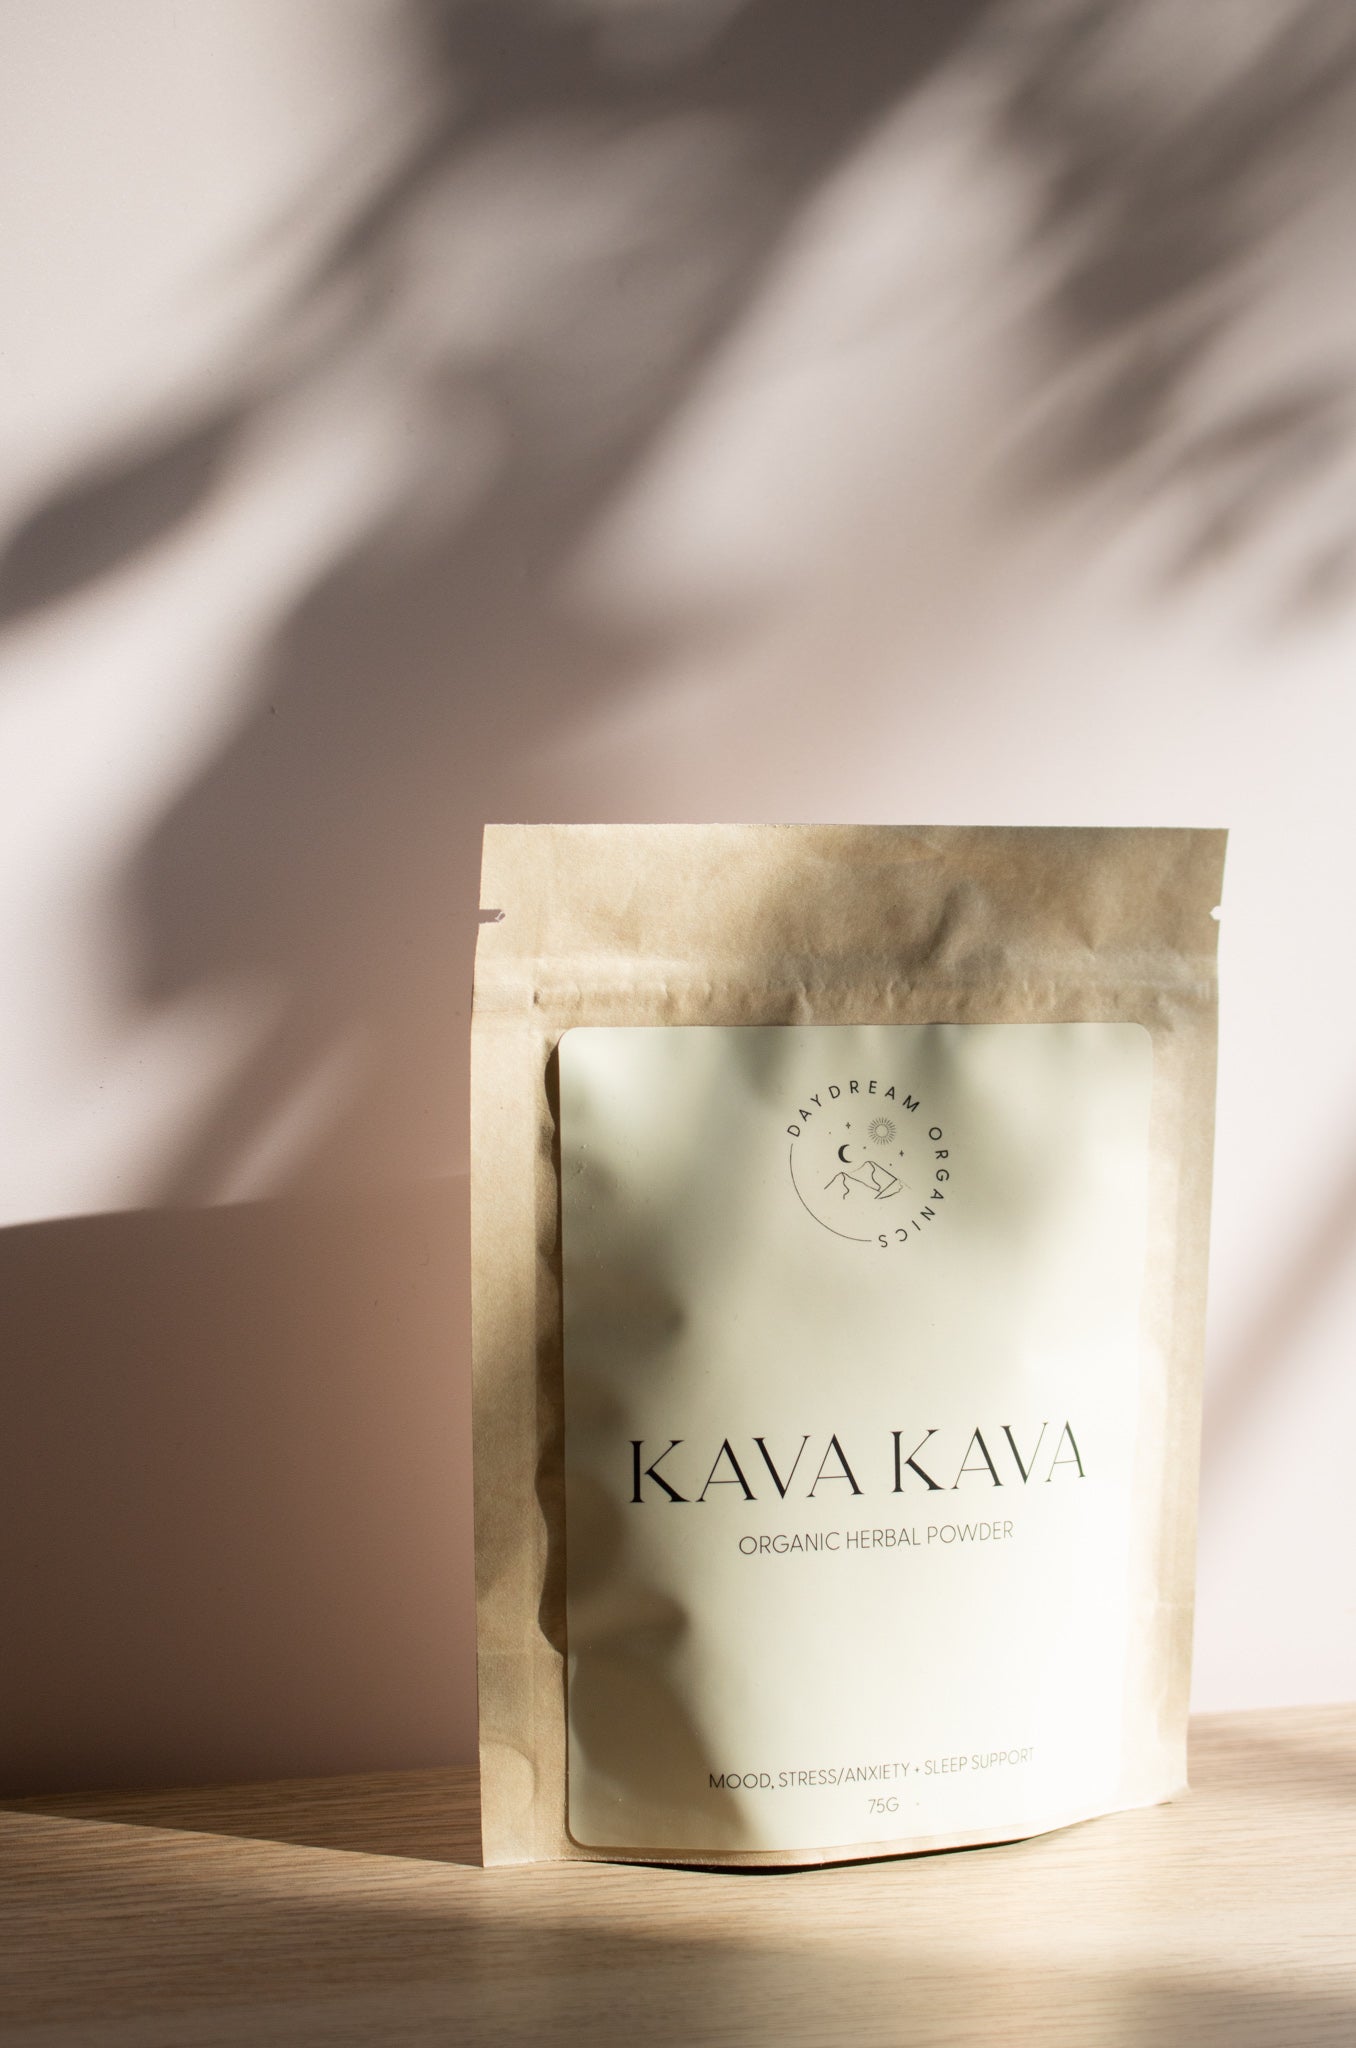 Cherished for centuries in the South Pacific, Kava Kava is an ancient plant medicine that has been revered as a natural remedy for stress relief due to it's ability to promote relaxation, ease stress and anxiety, support better sleep and evoke mellow moods.  